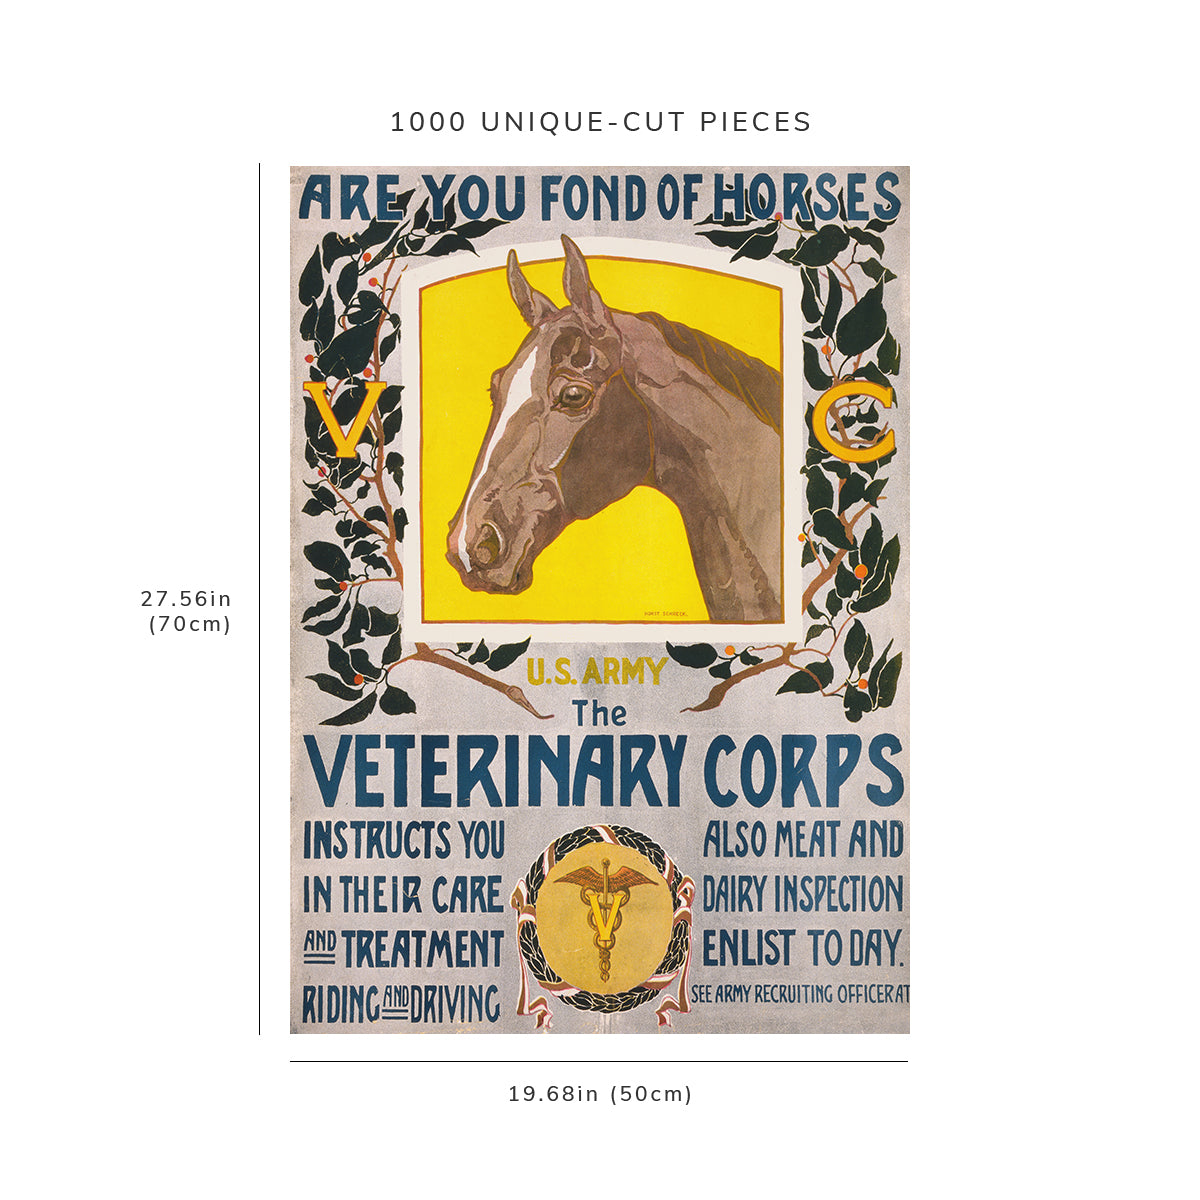 1000 piece puzzle: 1919 | Are you fond of horses – U.S. Army – The Veterinary Corps instructs you in their care and treatment, riding and driving | Horst Schreck